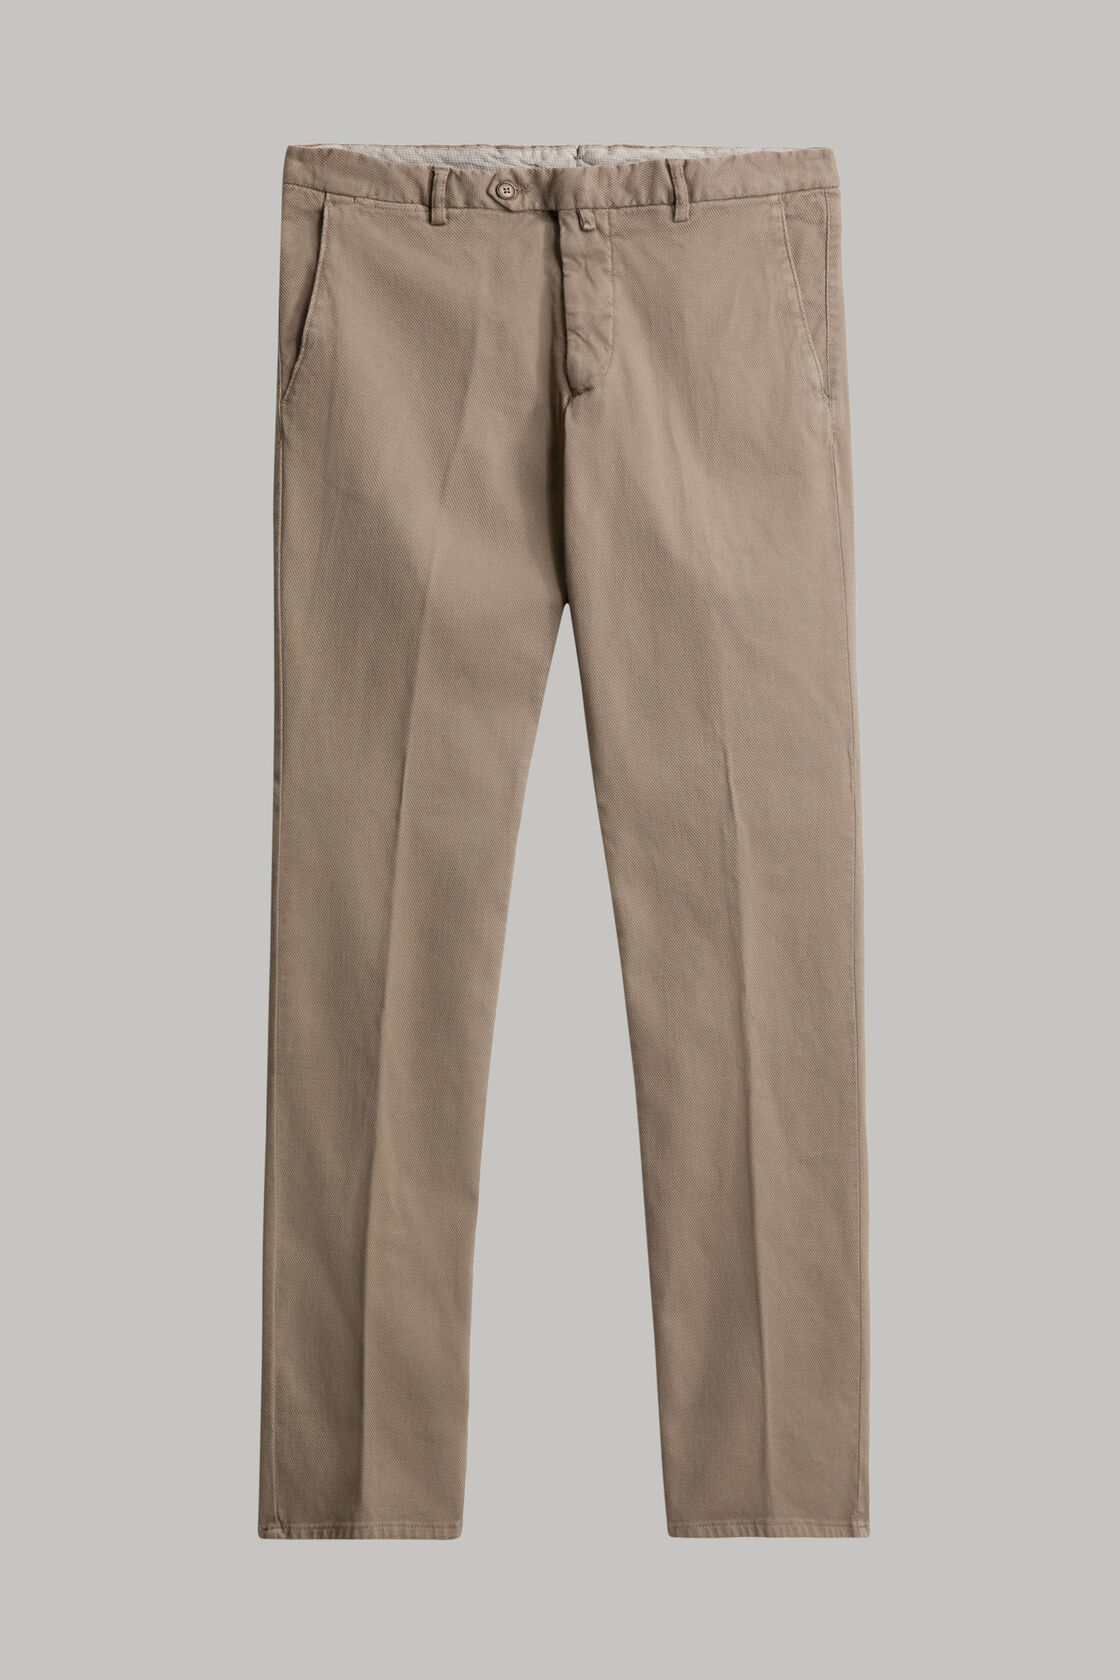 Slim fit stretch cotton and tencel trousers, , hi-res